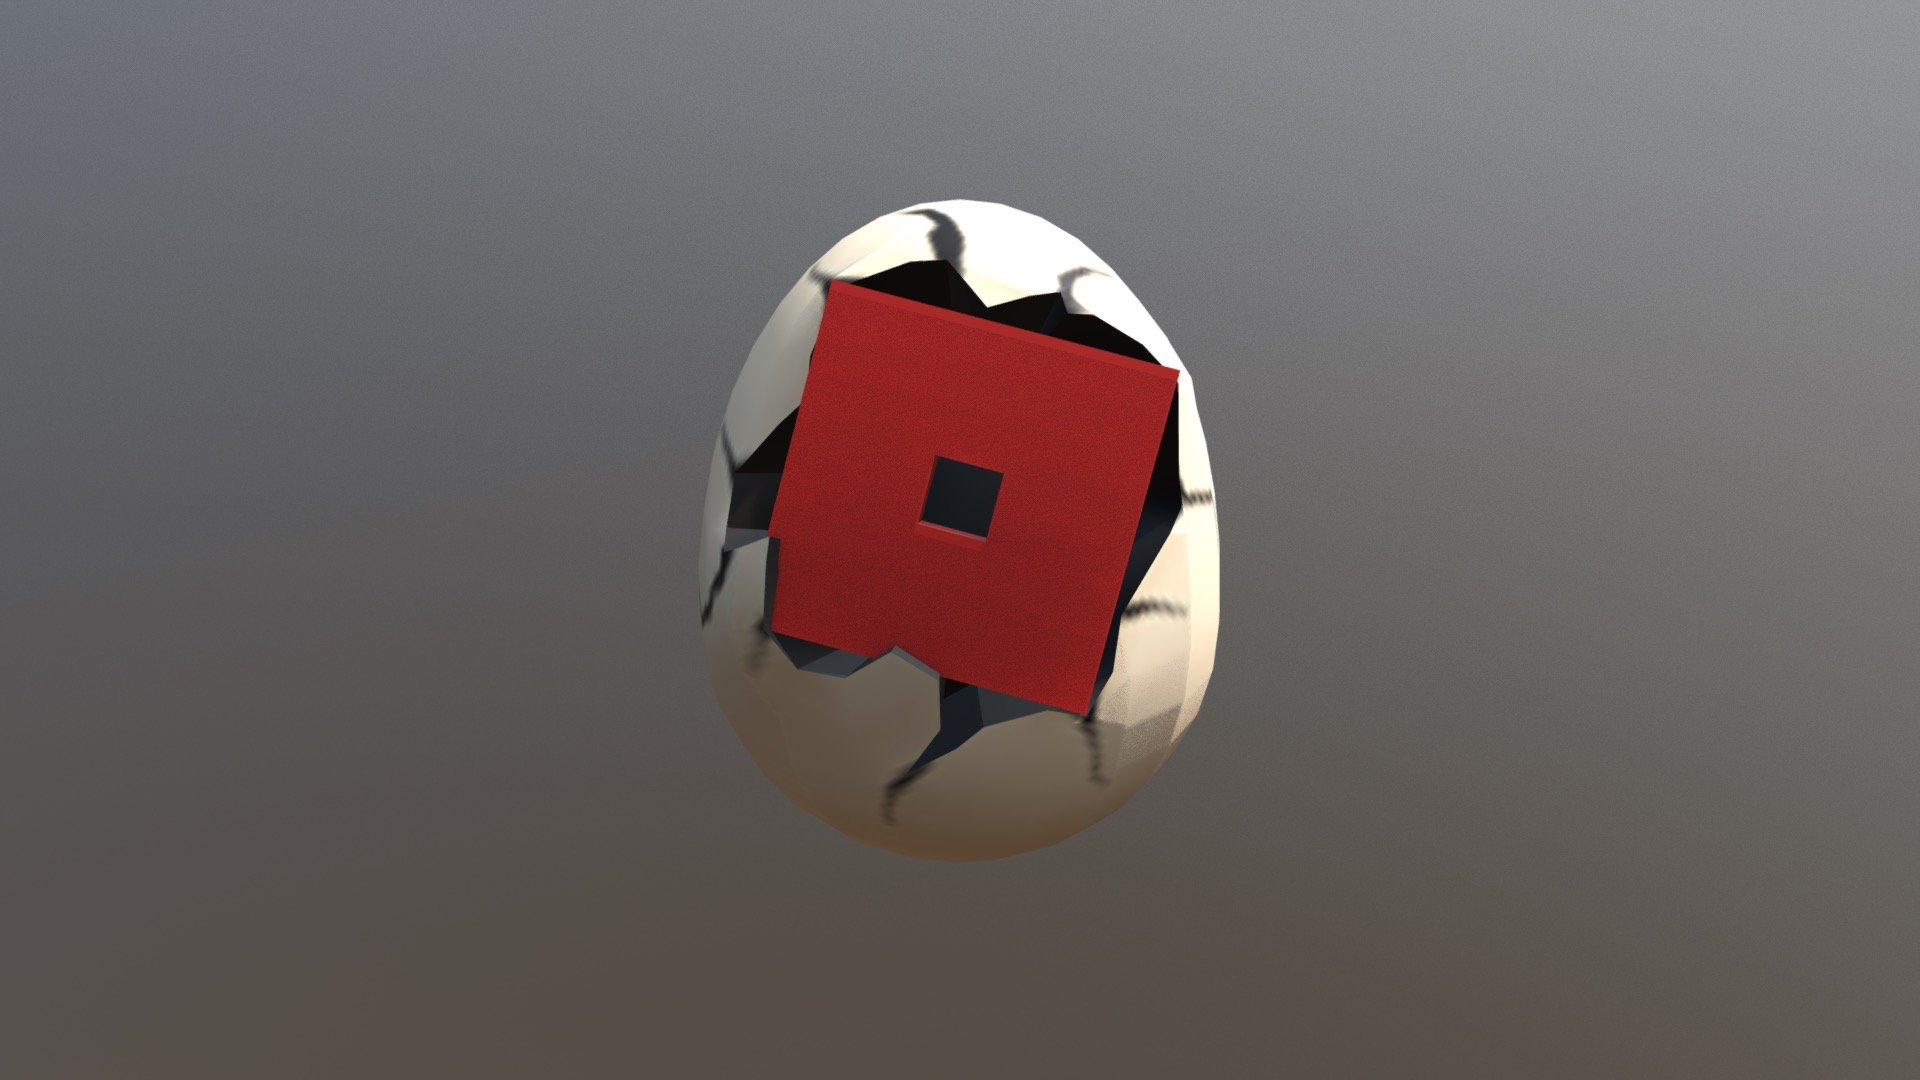 Roblox Egg 3d Model By Alexreed12345 Alexreed12345 C1205f5 Sketchfab - knight of chivalry roblox rbxrocks